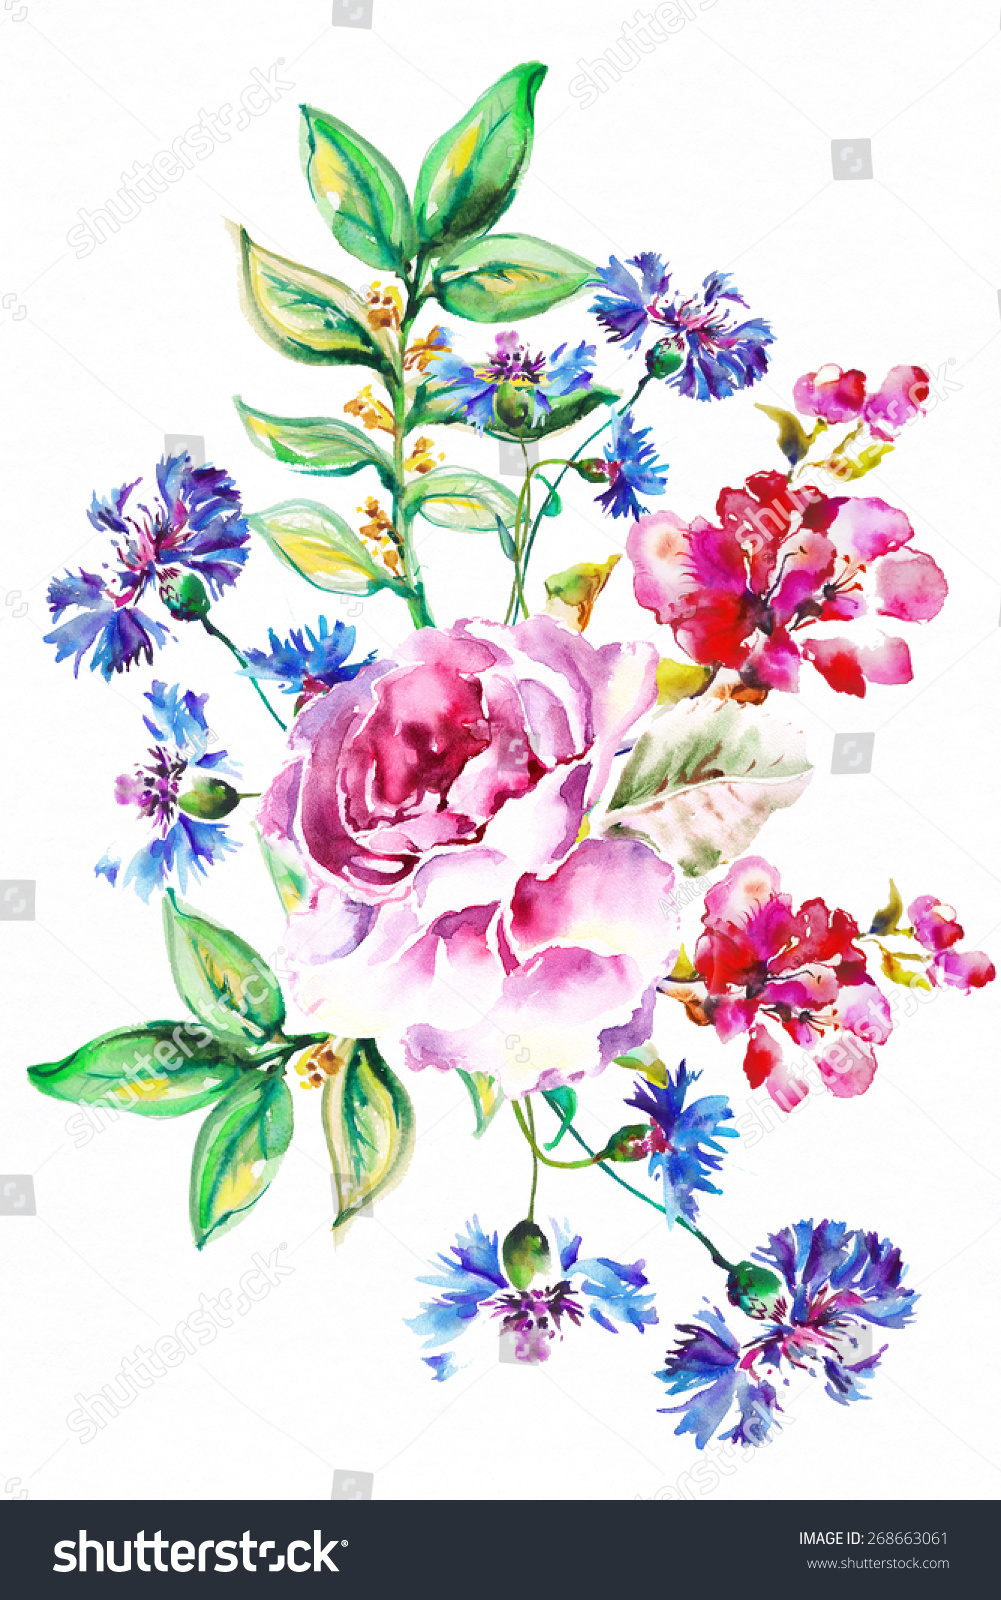 Bright Exotic Bouquet From Flowers , Drawn With Watercolor Paints.Album ...